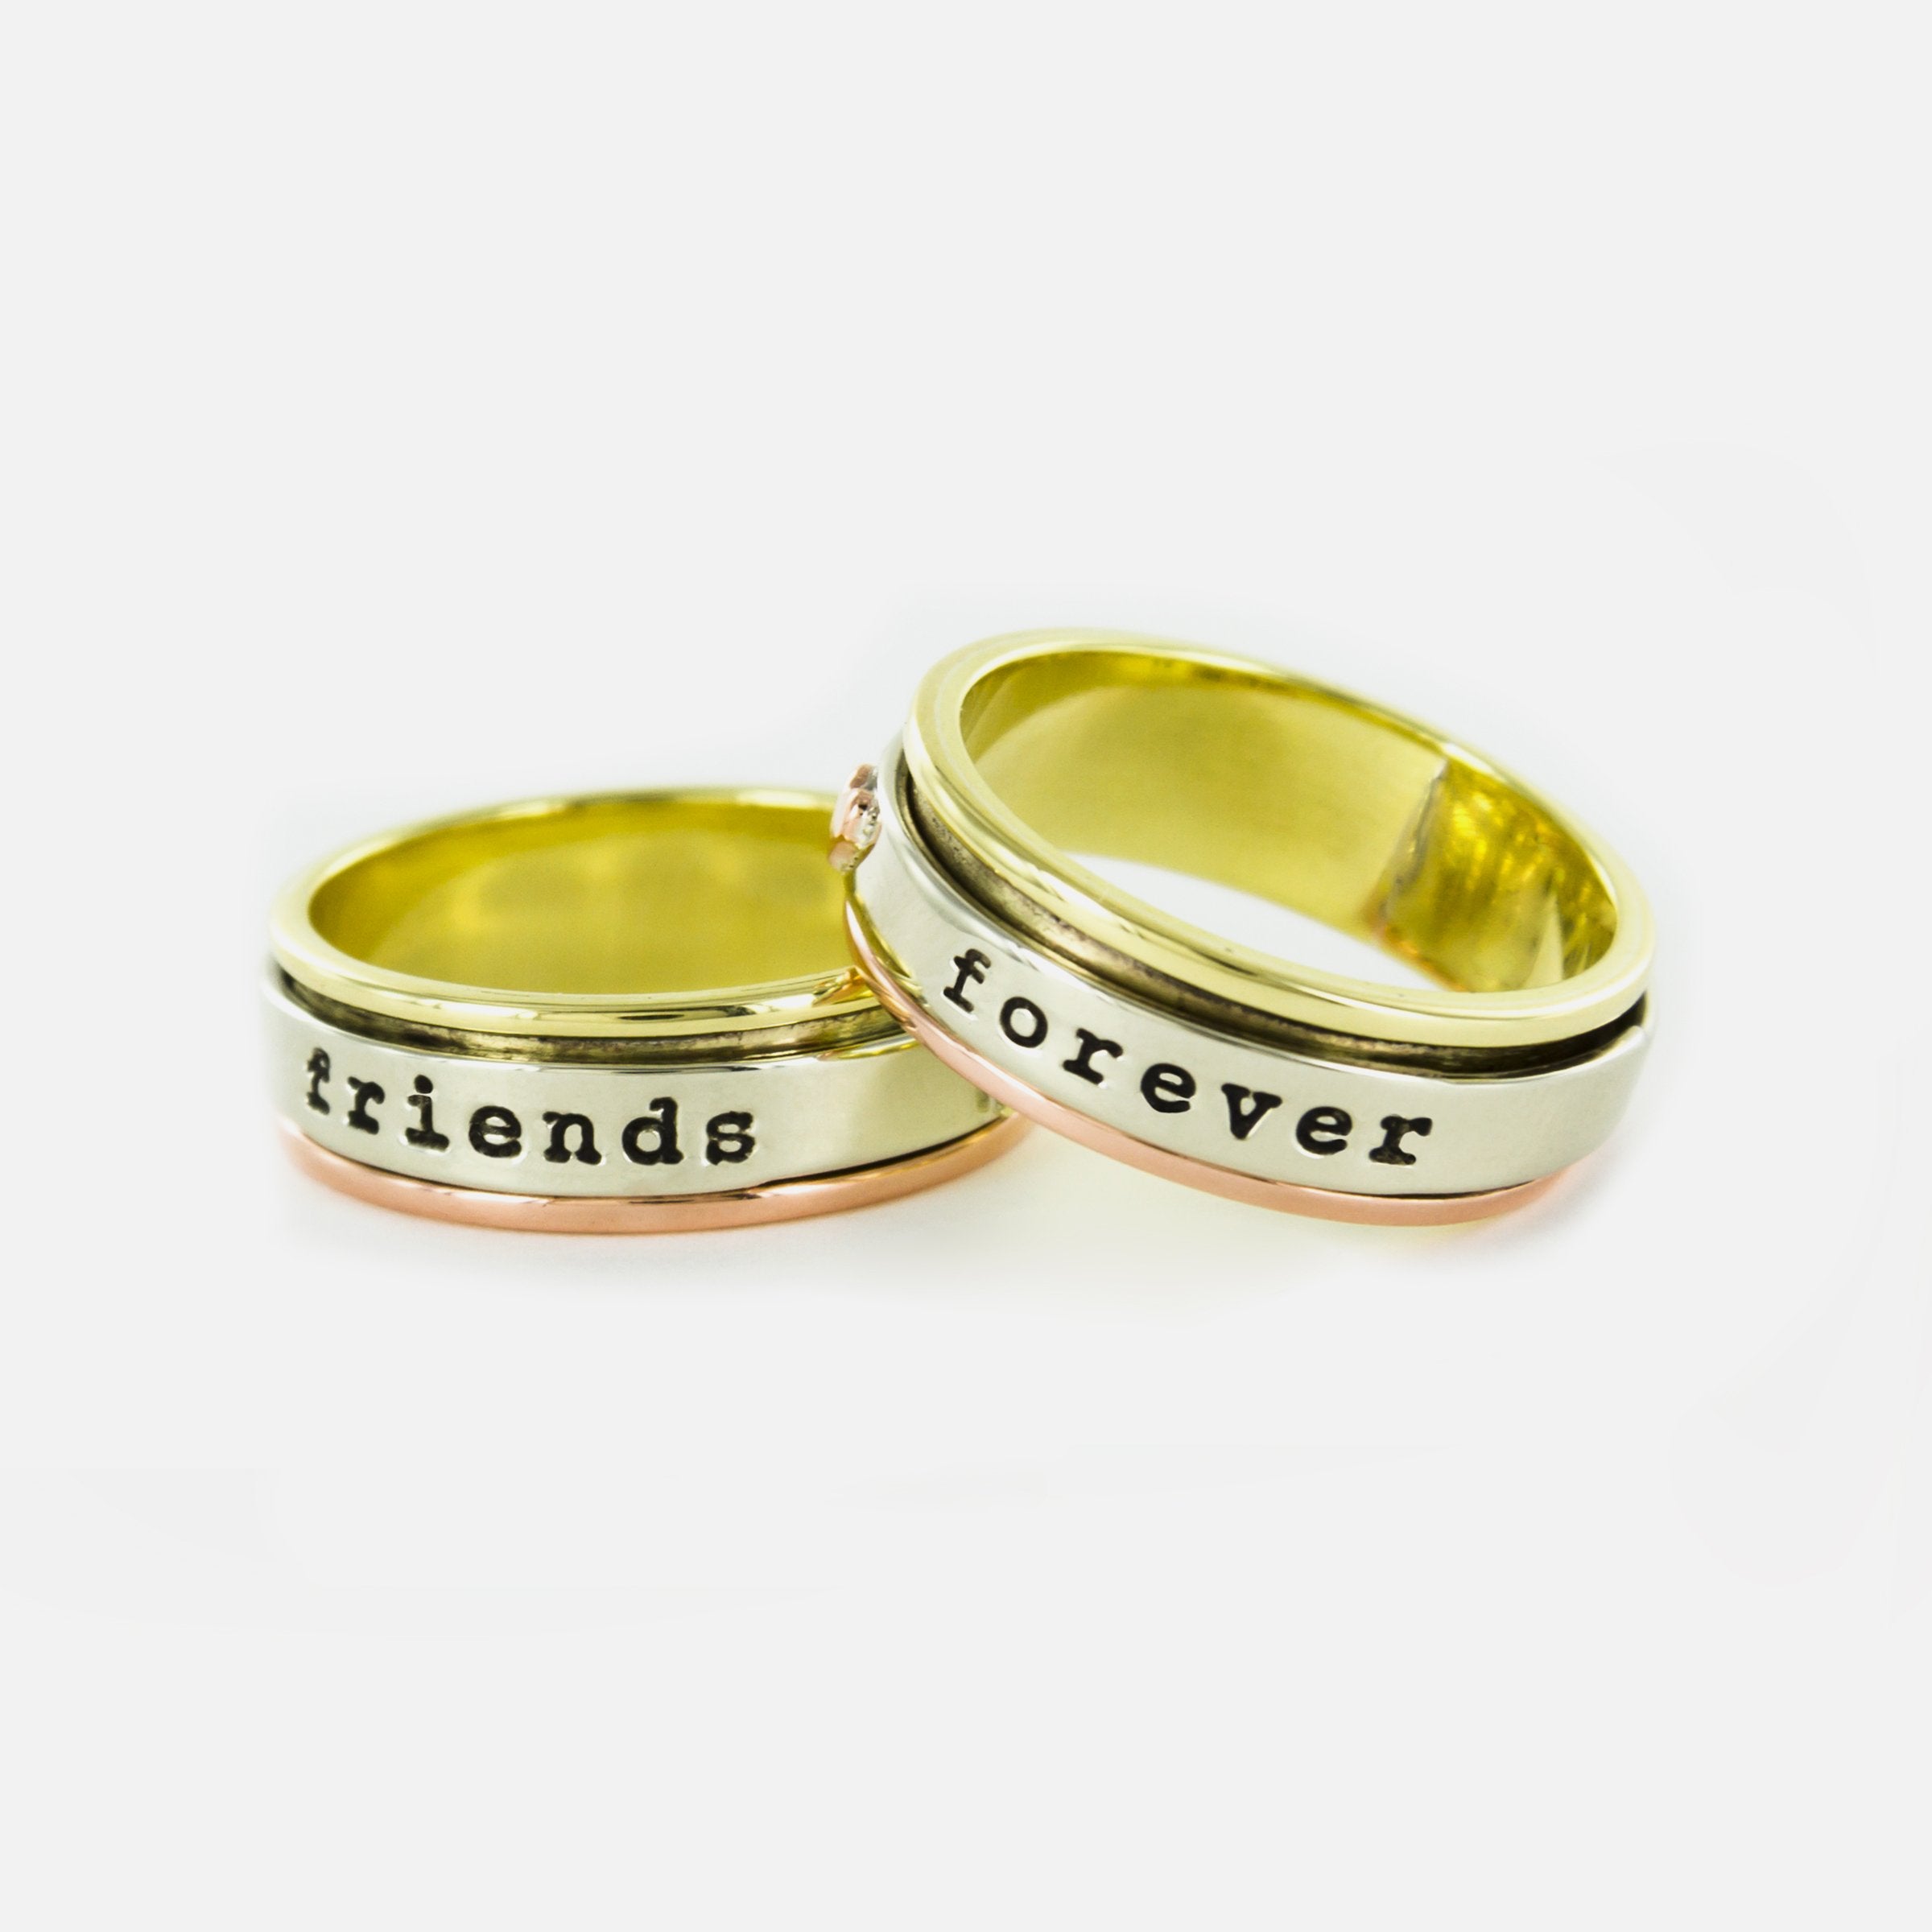 Friends Forever Mixed Metals Spinning Ring - 8